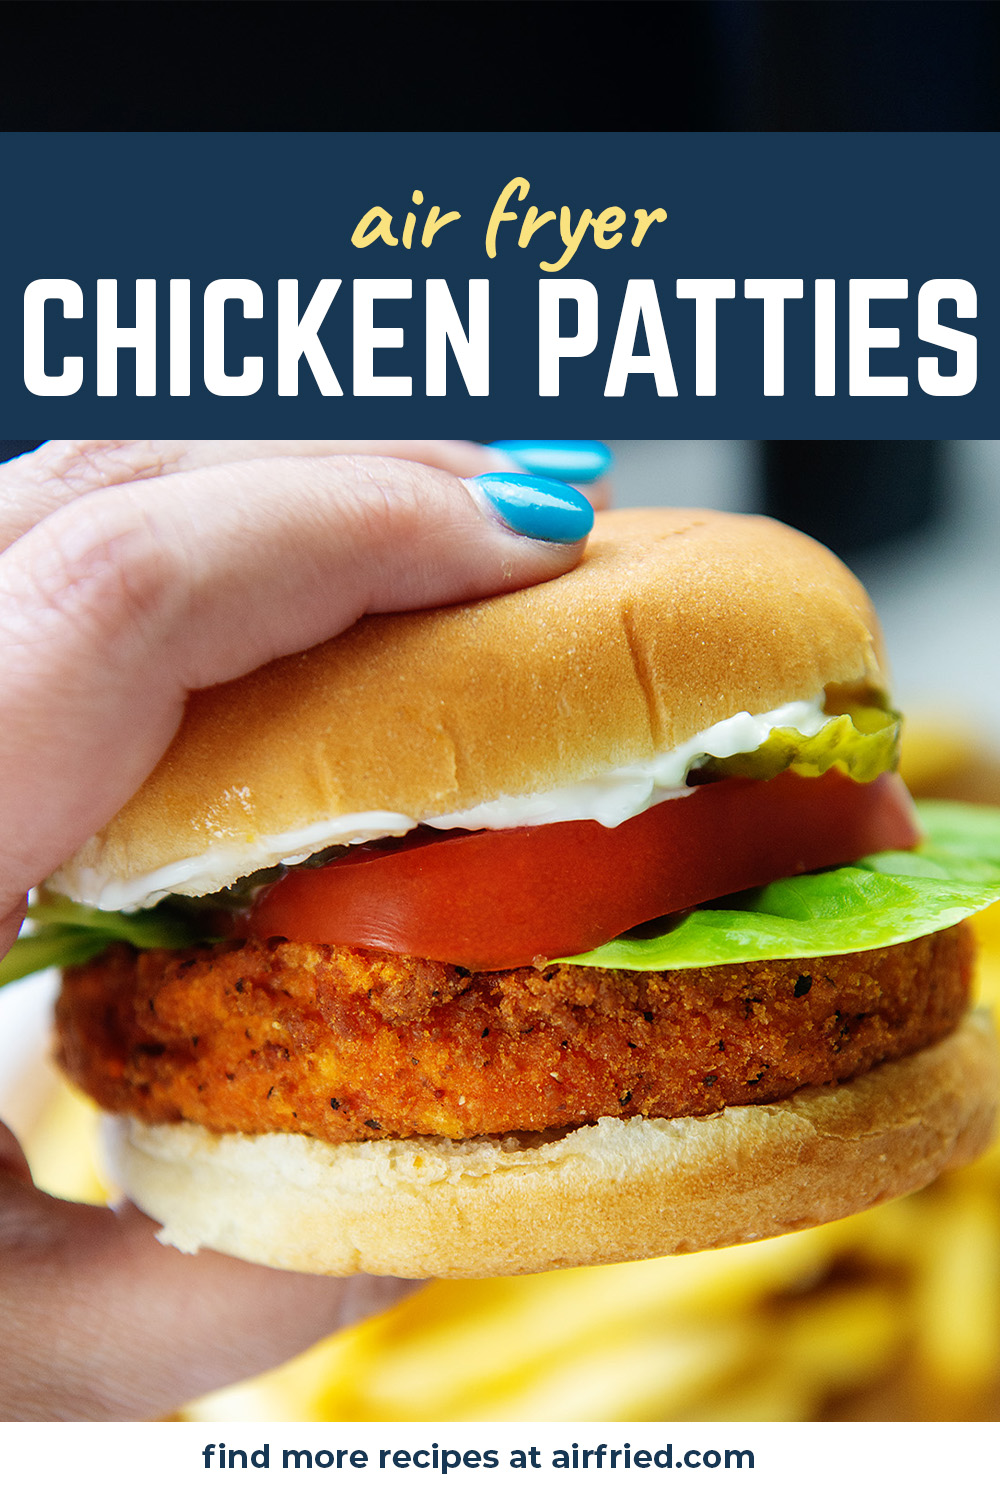 You can make these chicken patty sandwiches faster than you can get through the drive through!